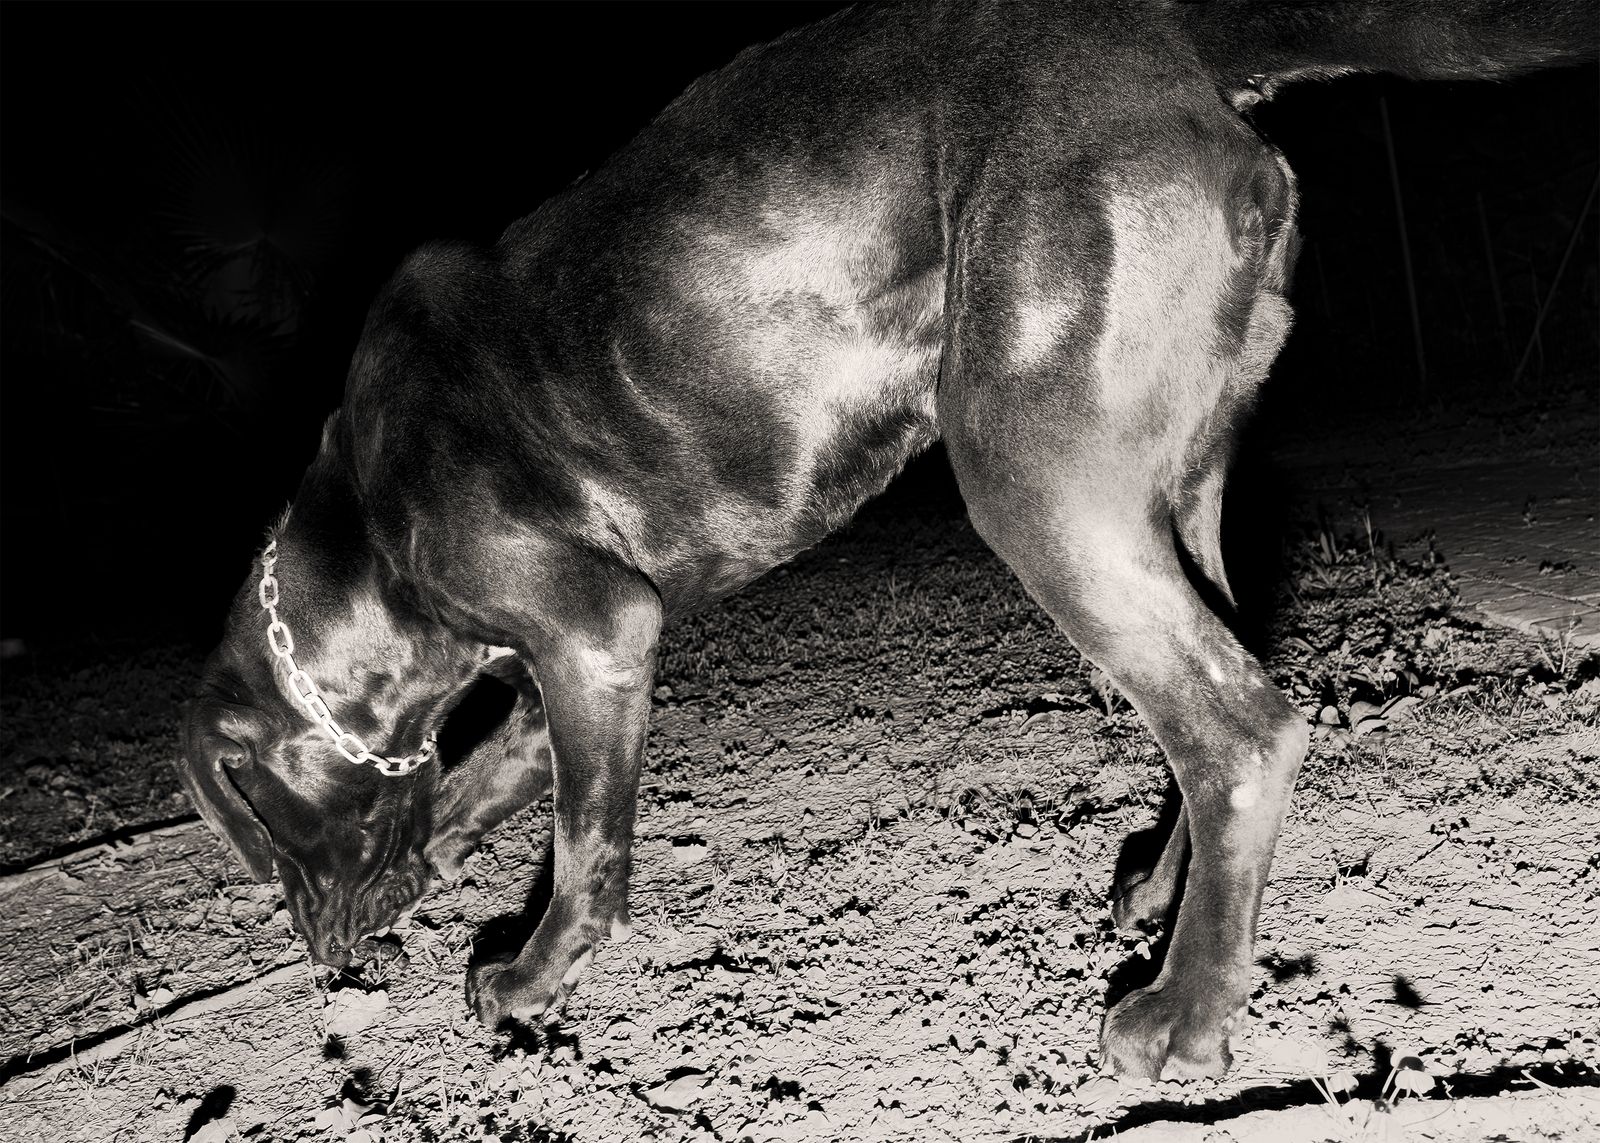 © Alessio Pellicoro - Image from the The night of the Hunter photography project